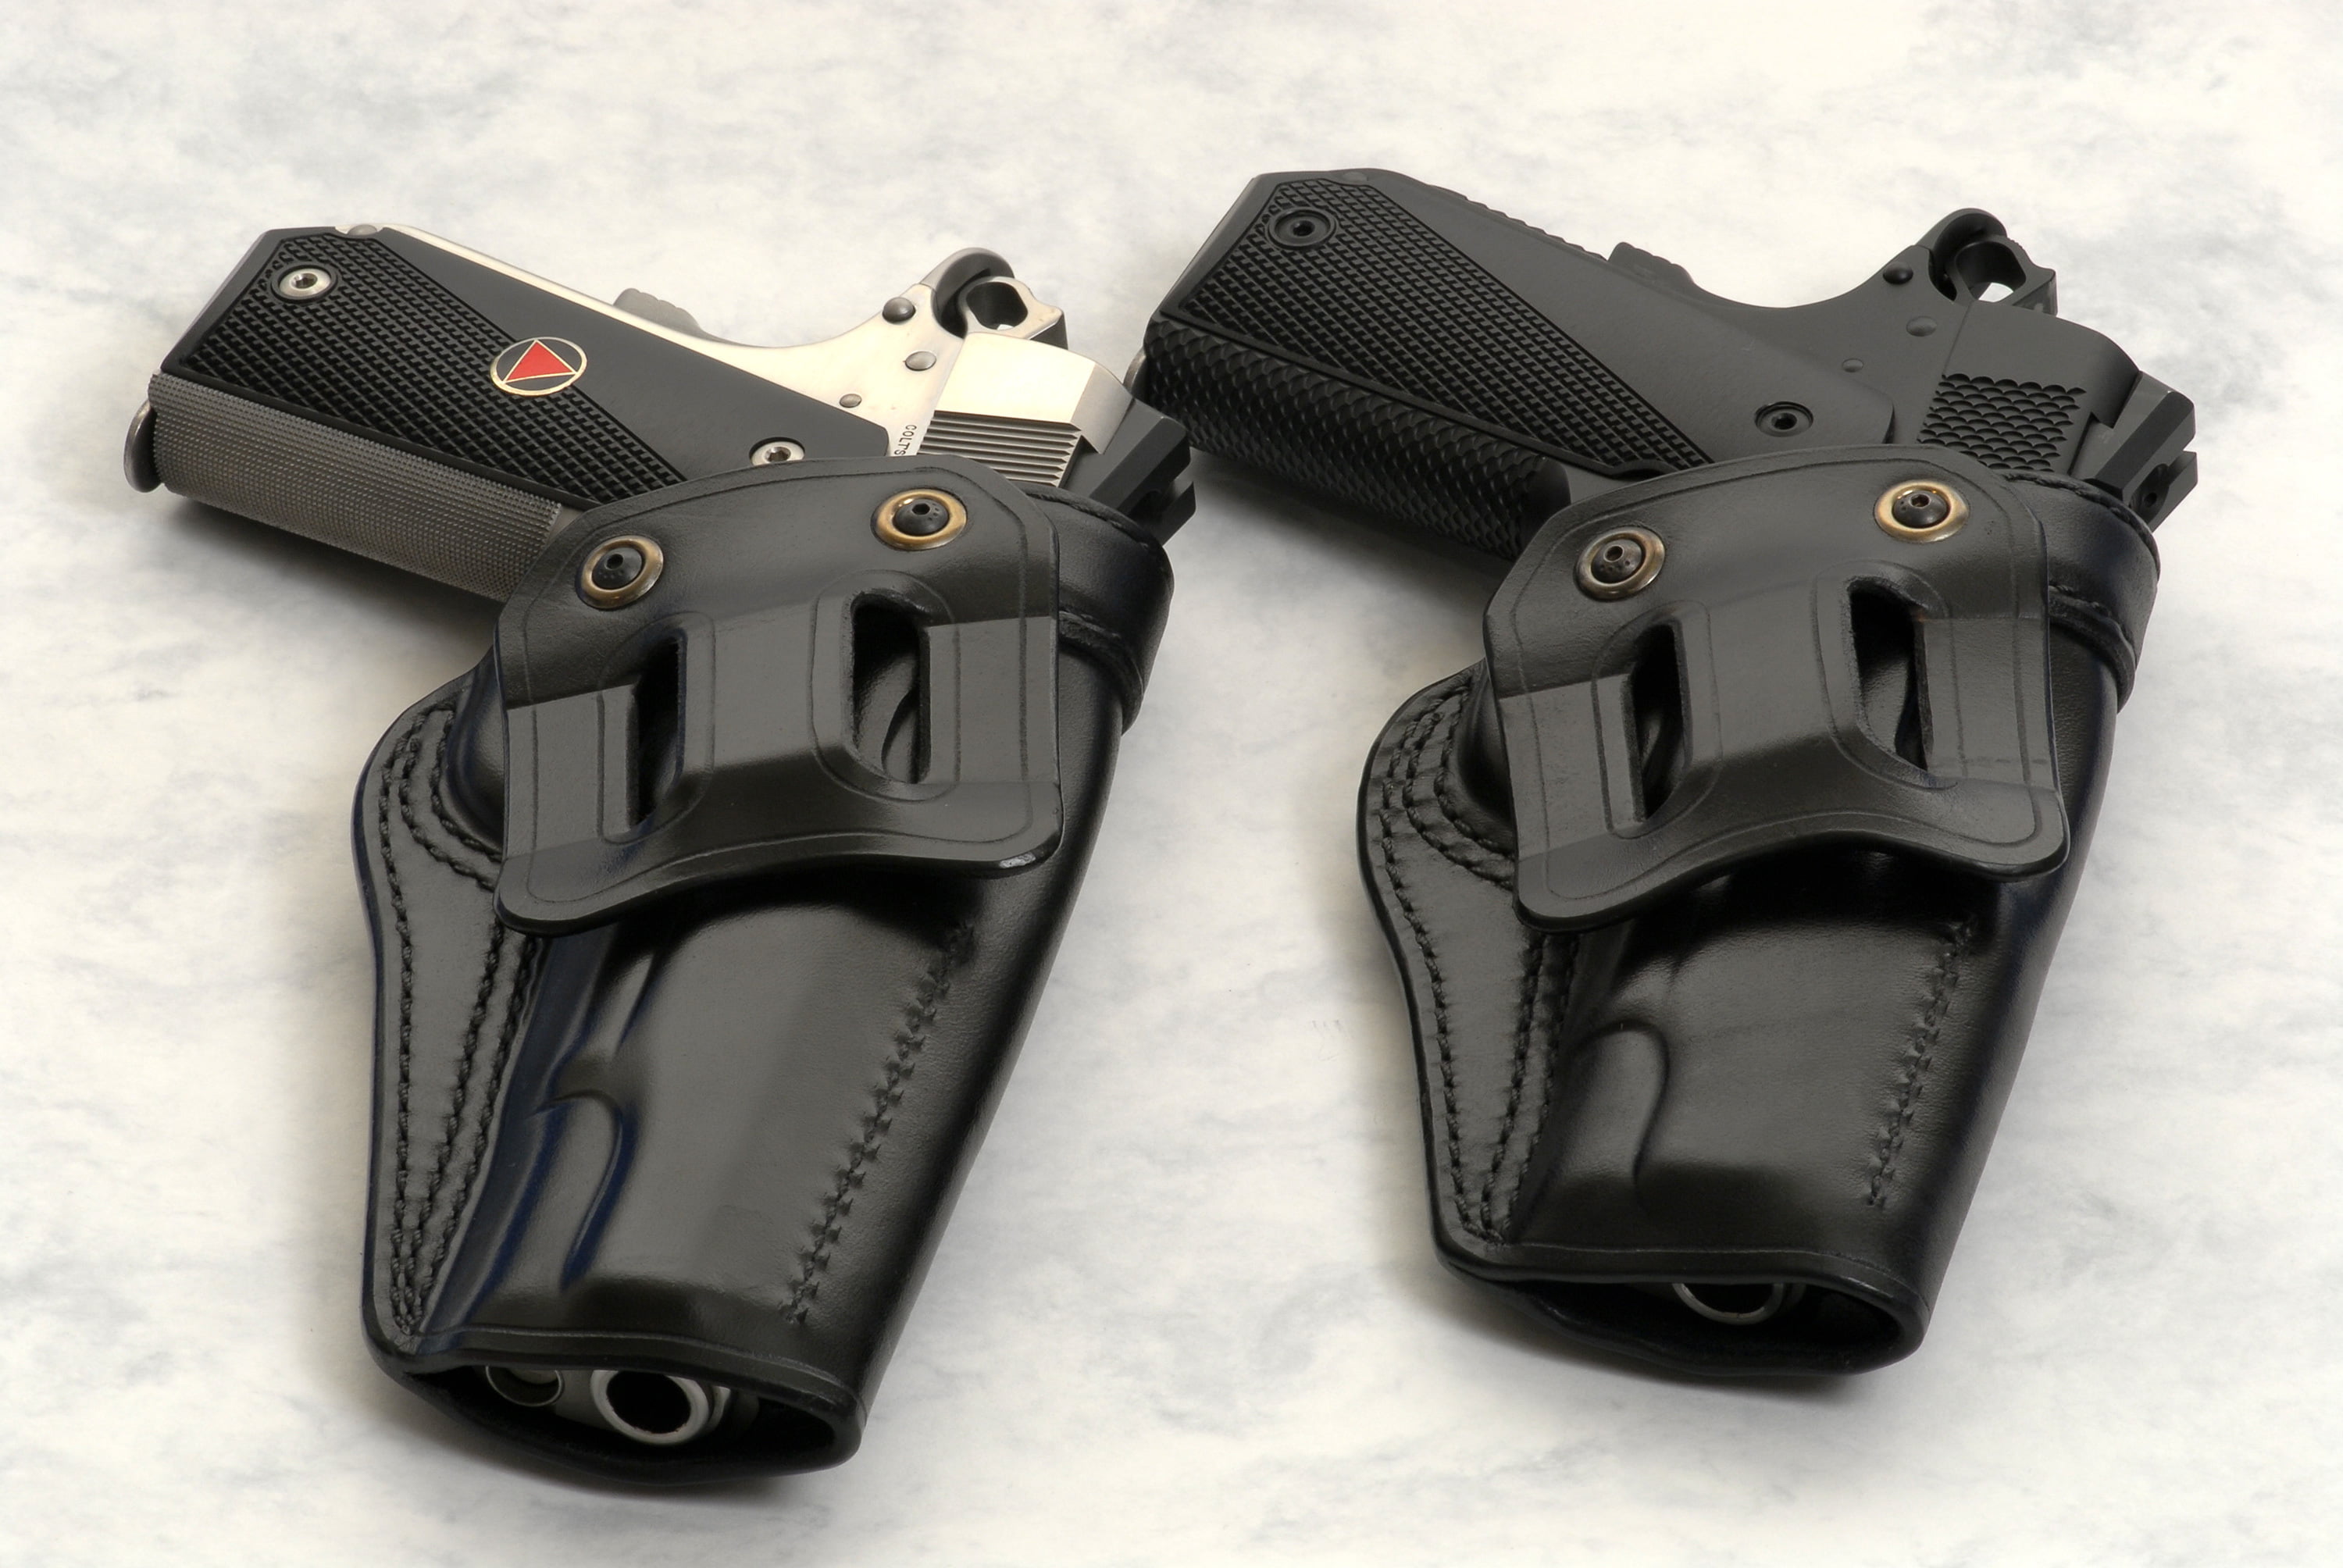 two black semi-automatic pistols and two holsters, Wallpaper